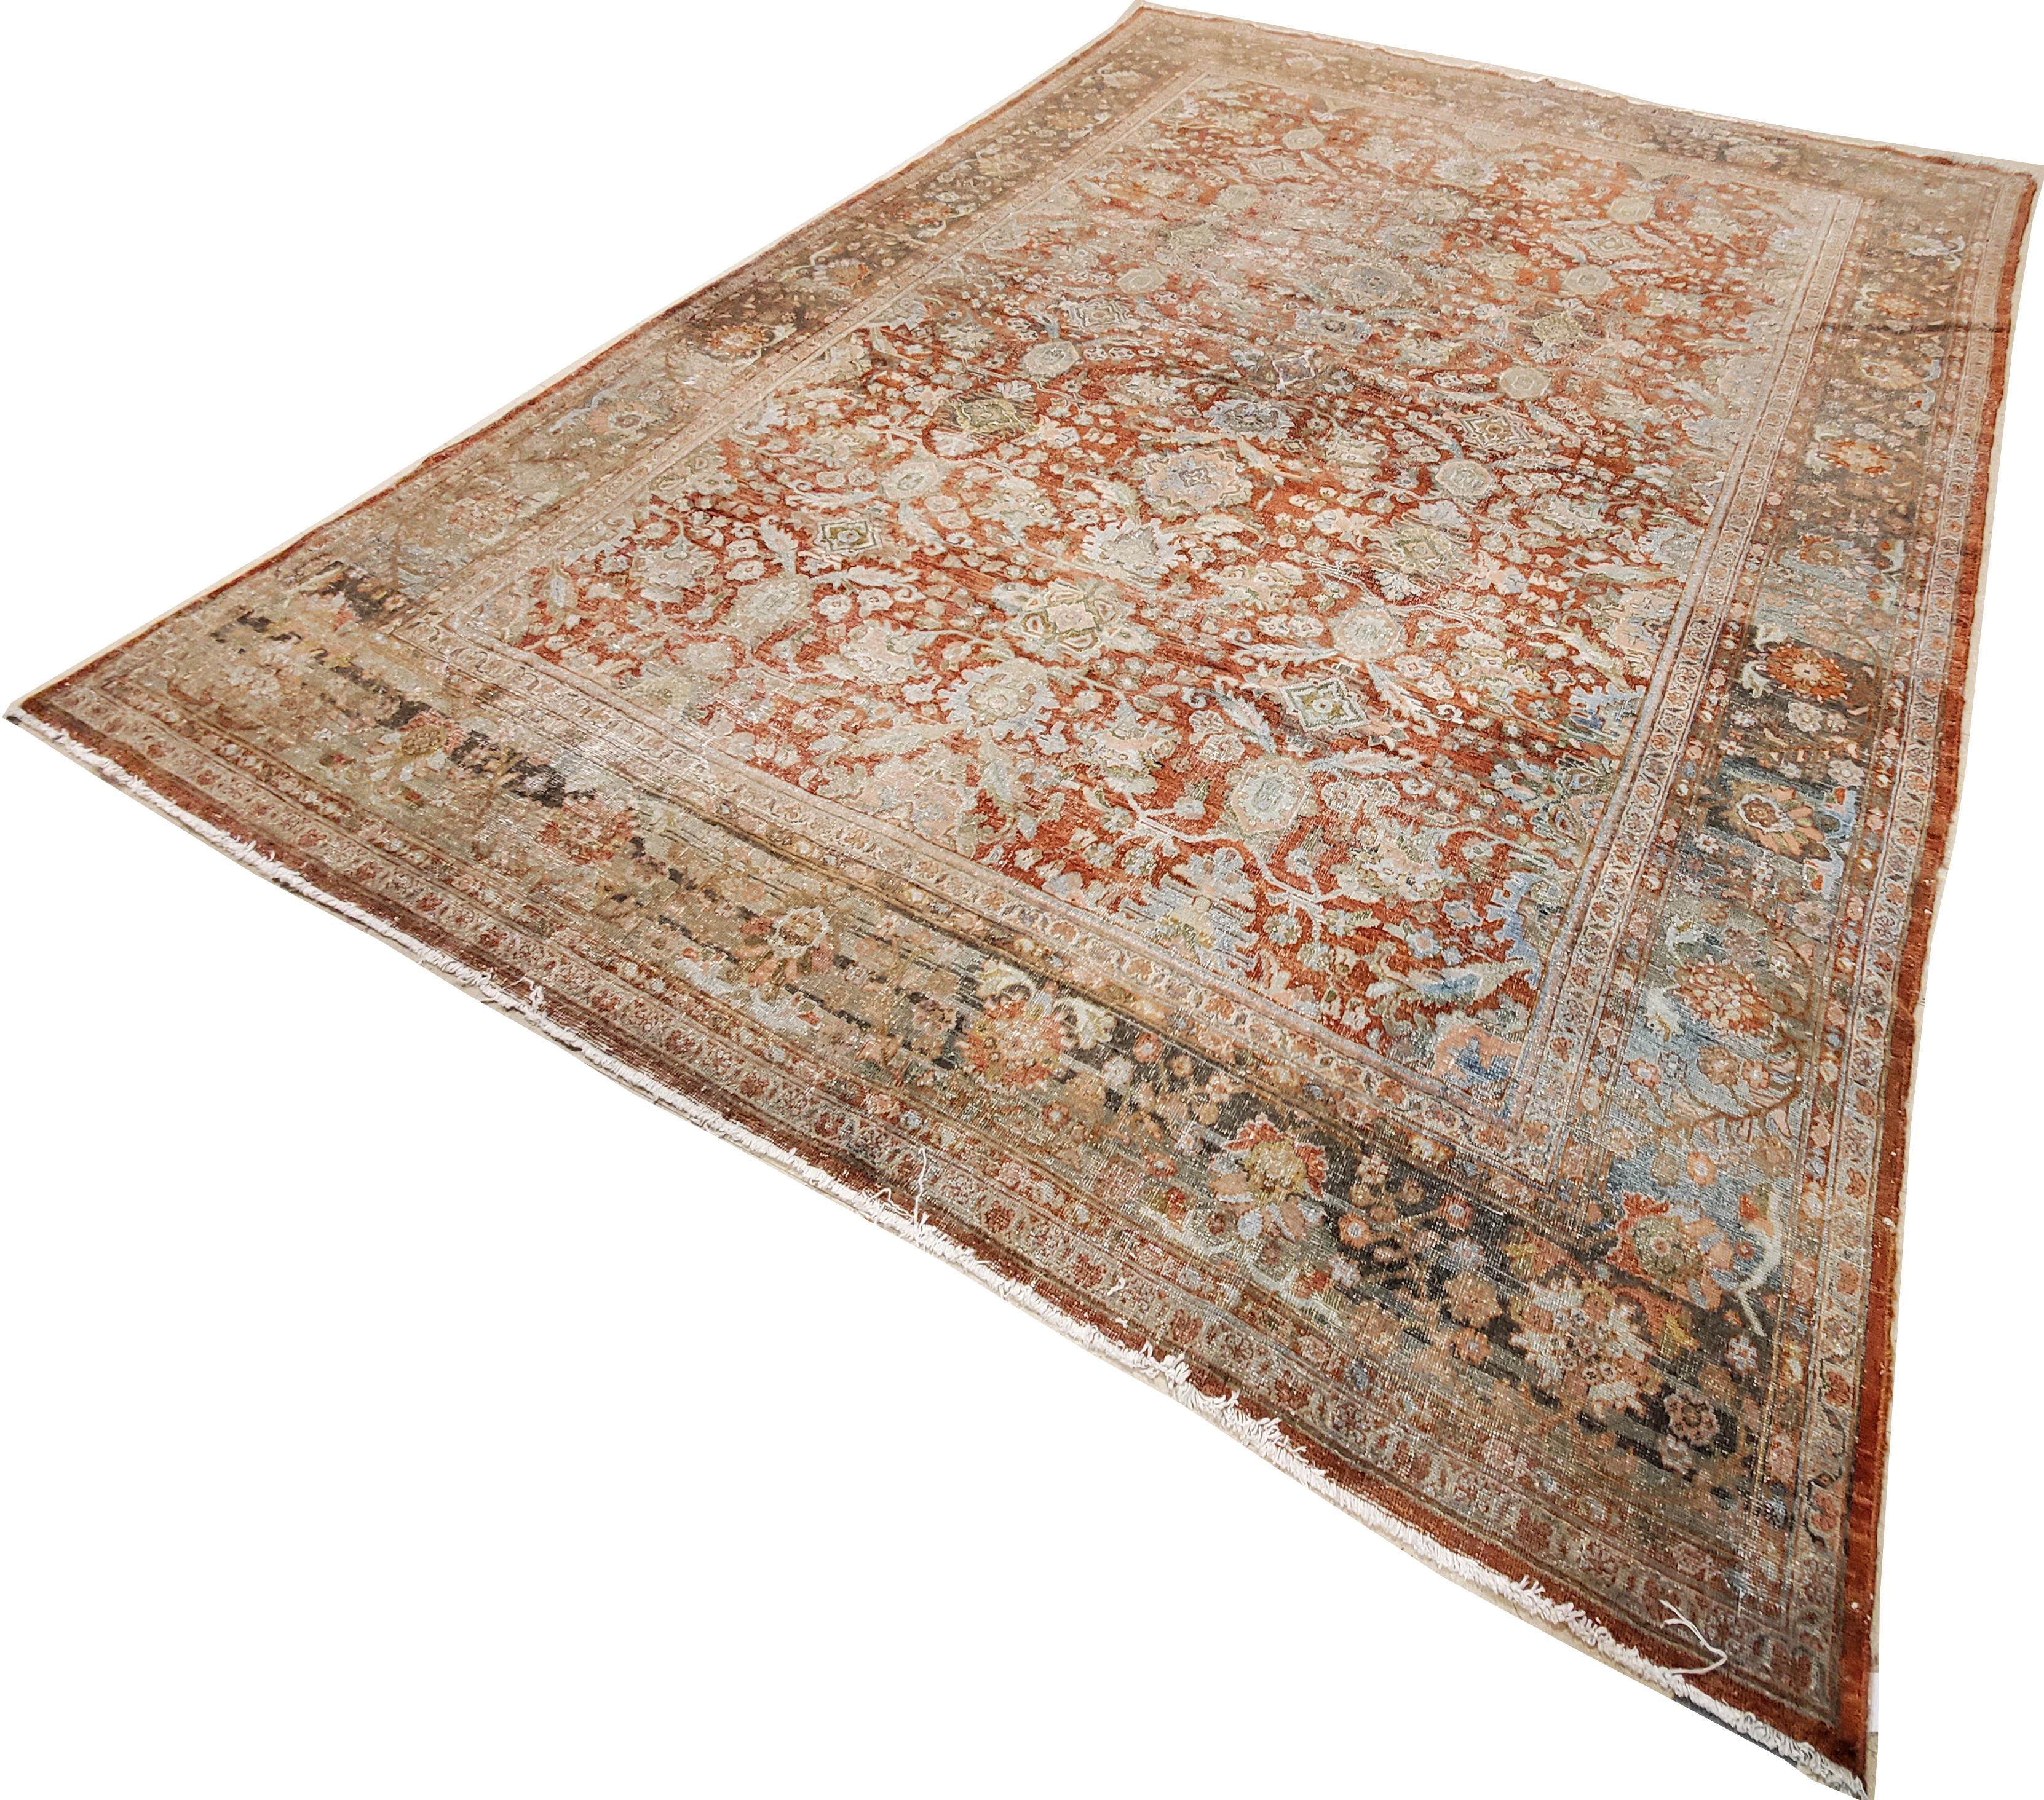 Antique Persian Sultanabad Carpet, Handmade Oriental Rug, Light Blue, Rust, Gray For Sale 3